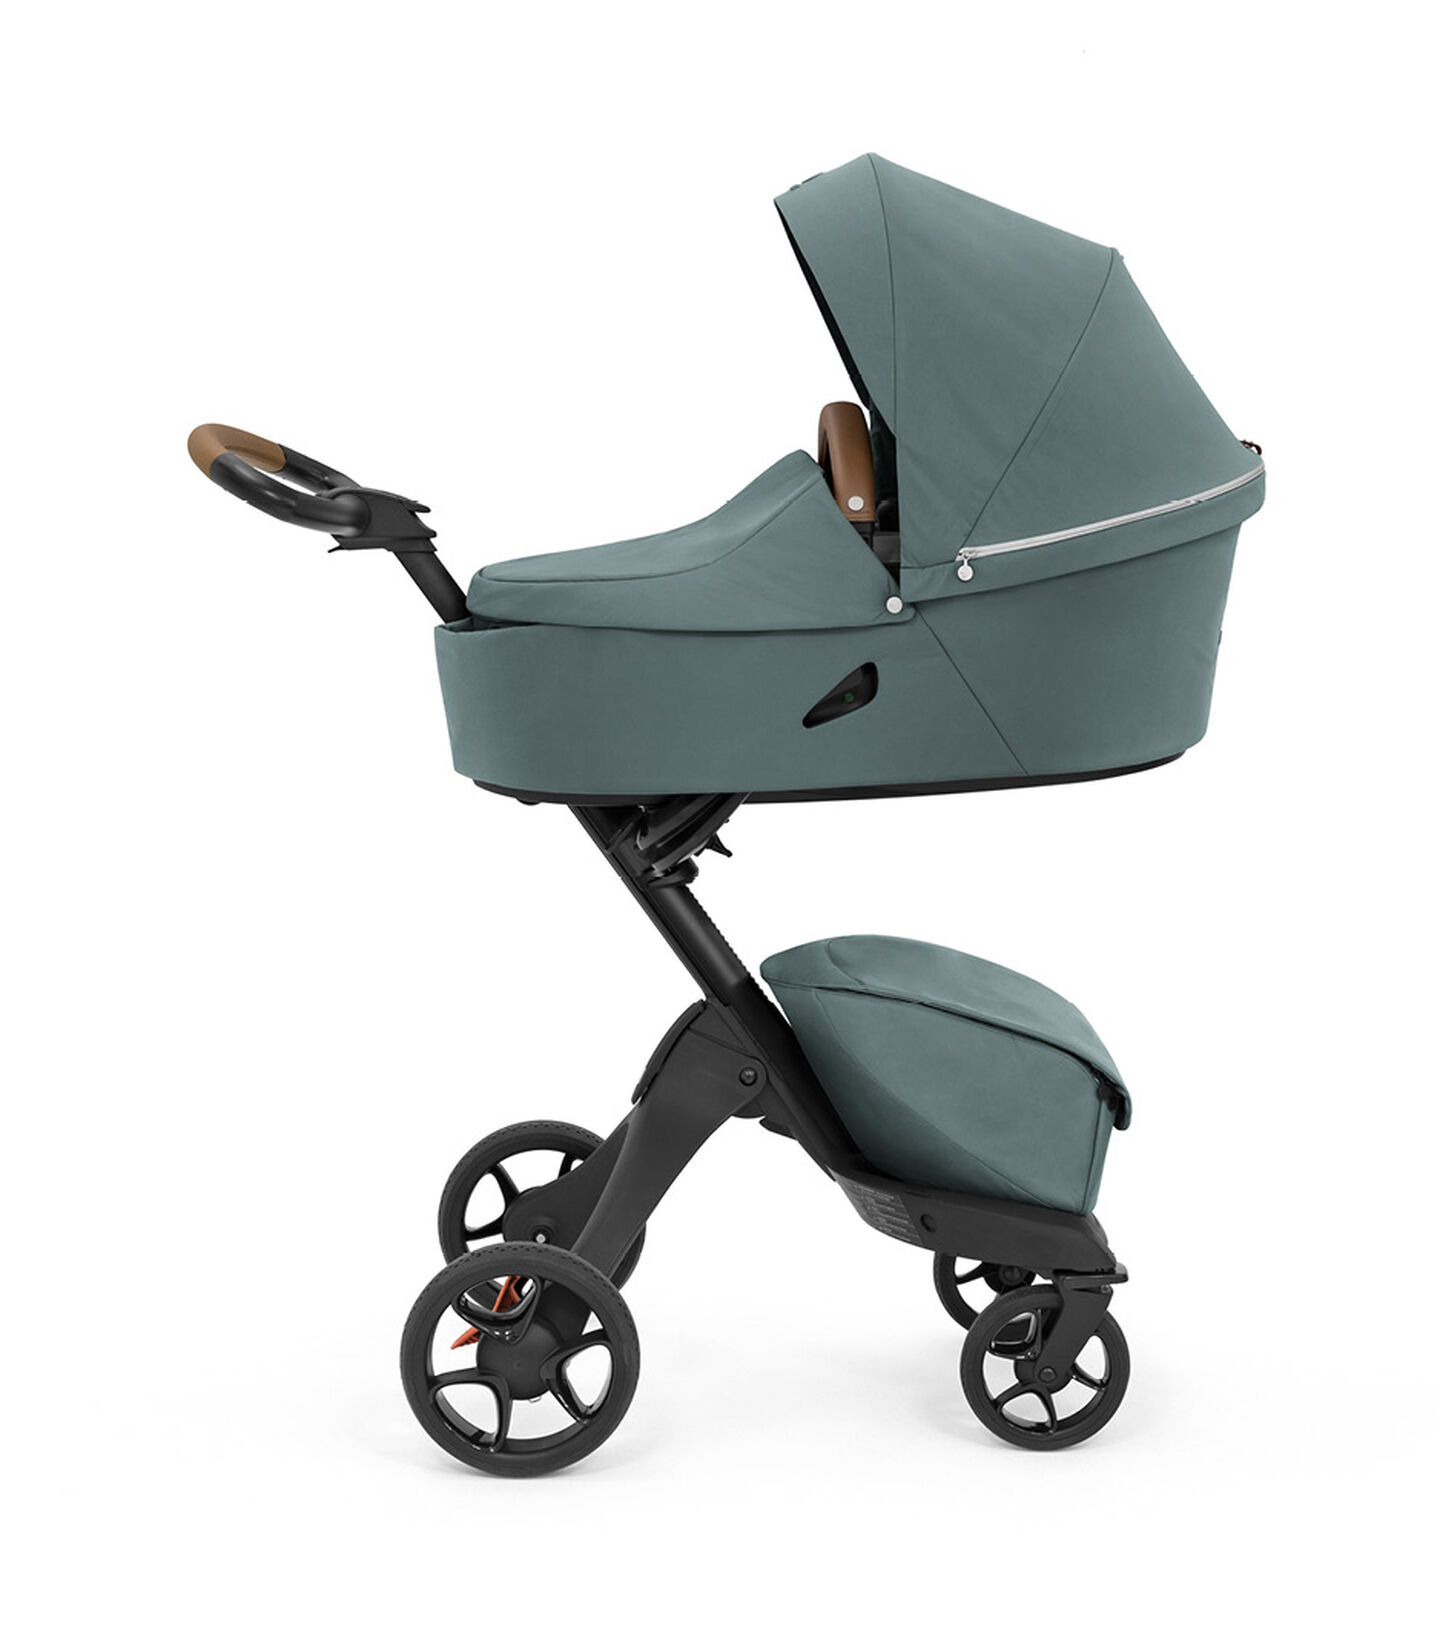 Stokke® Xplory® X Babyschale Cool Teal, Cool Teal, mainview view 2